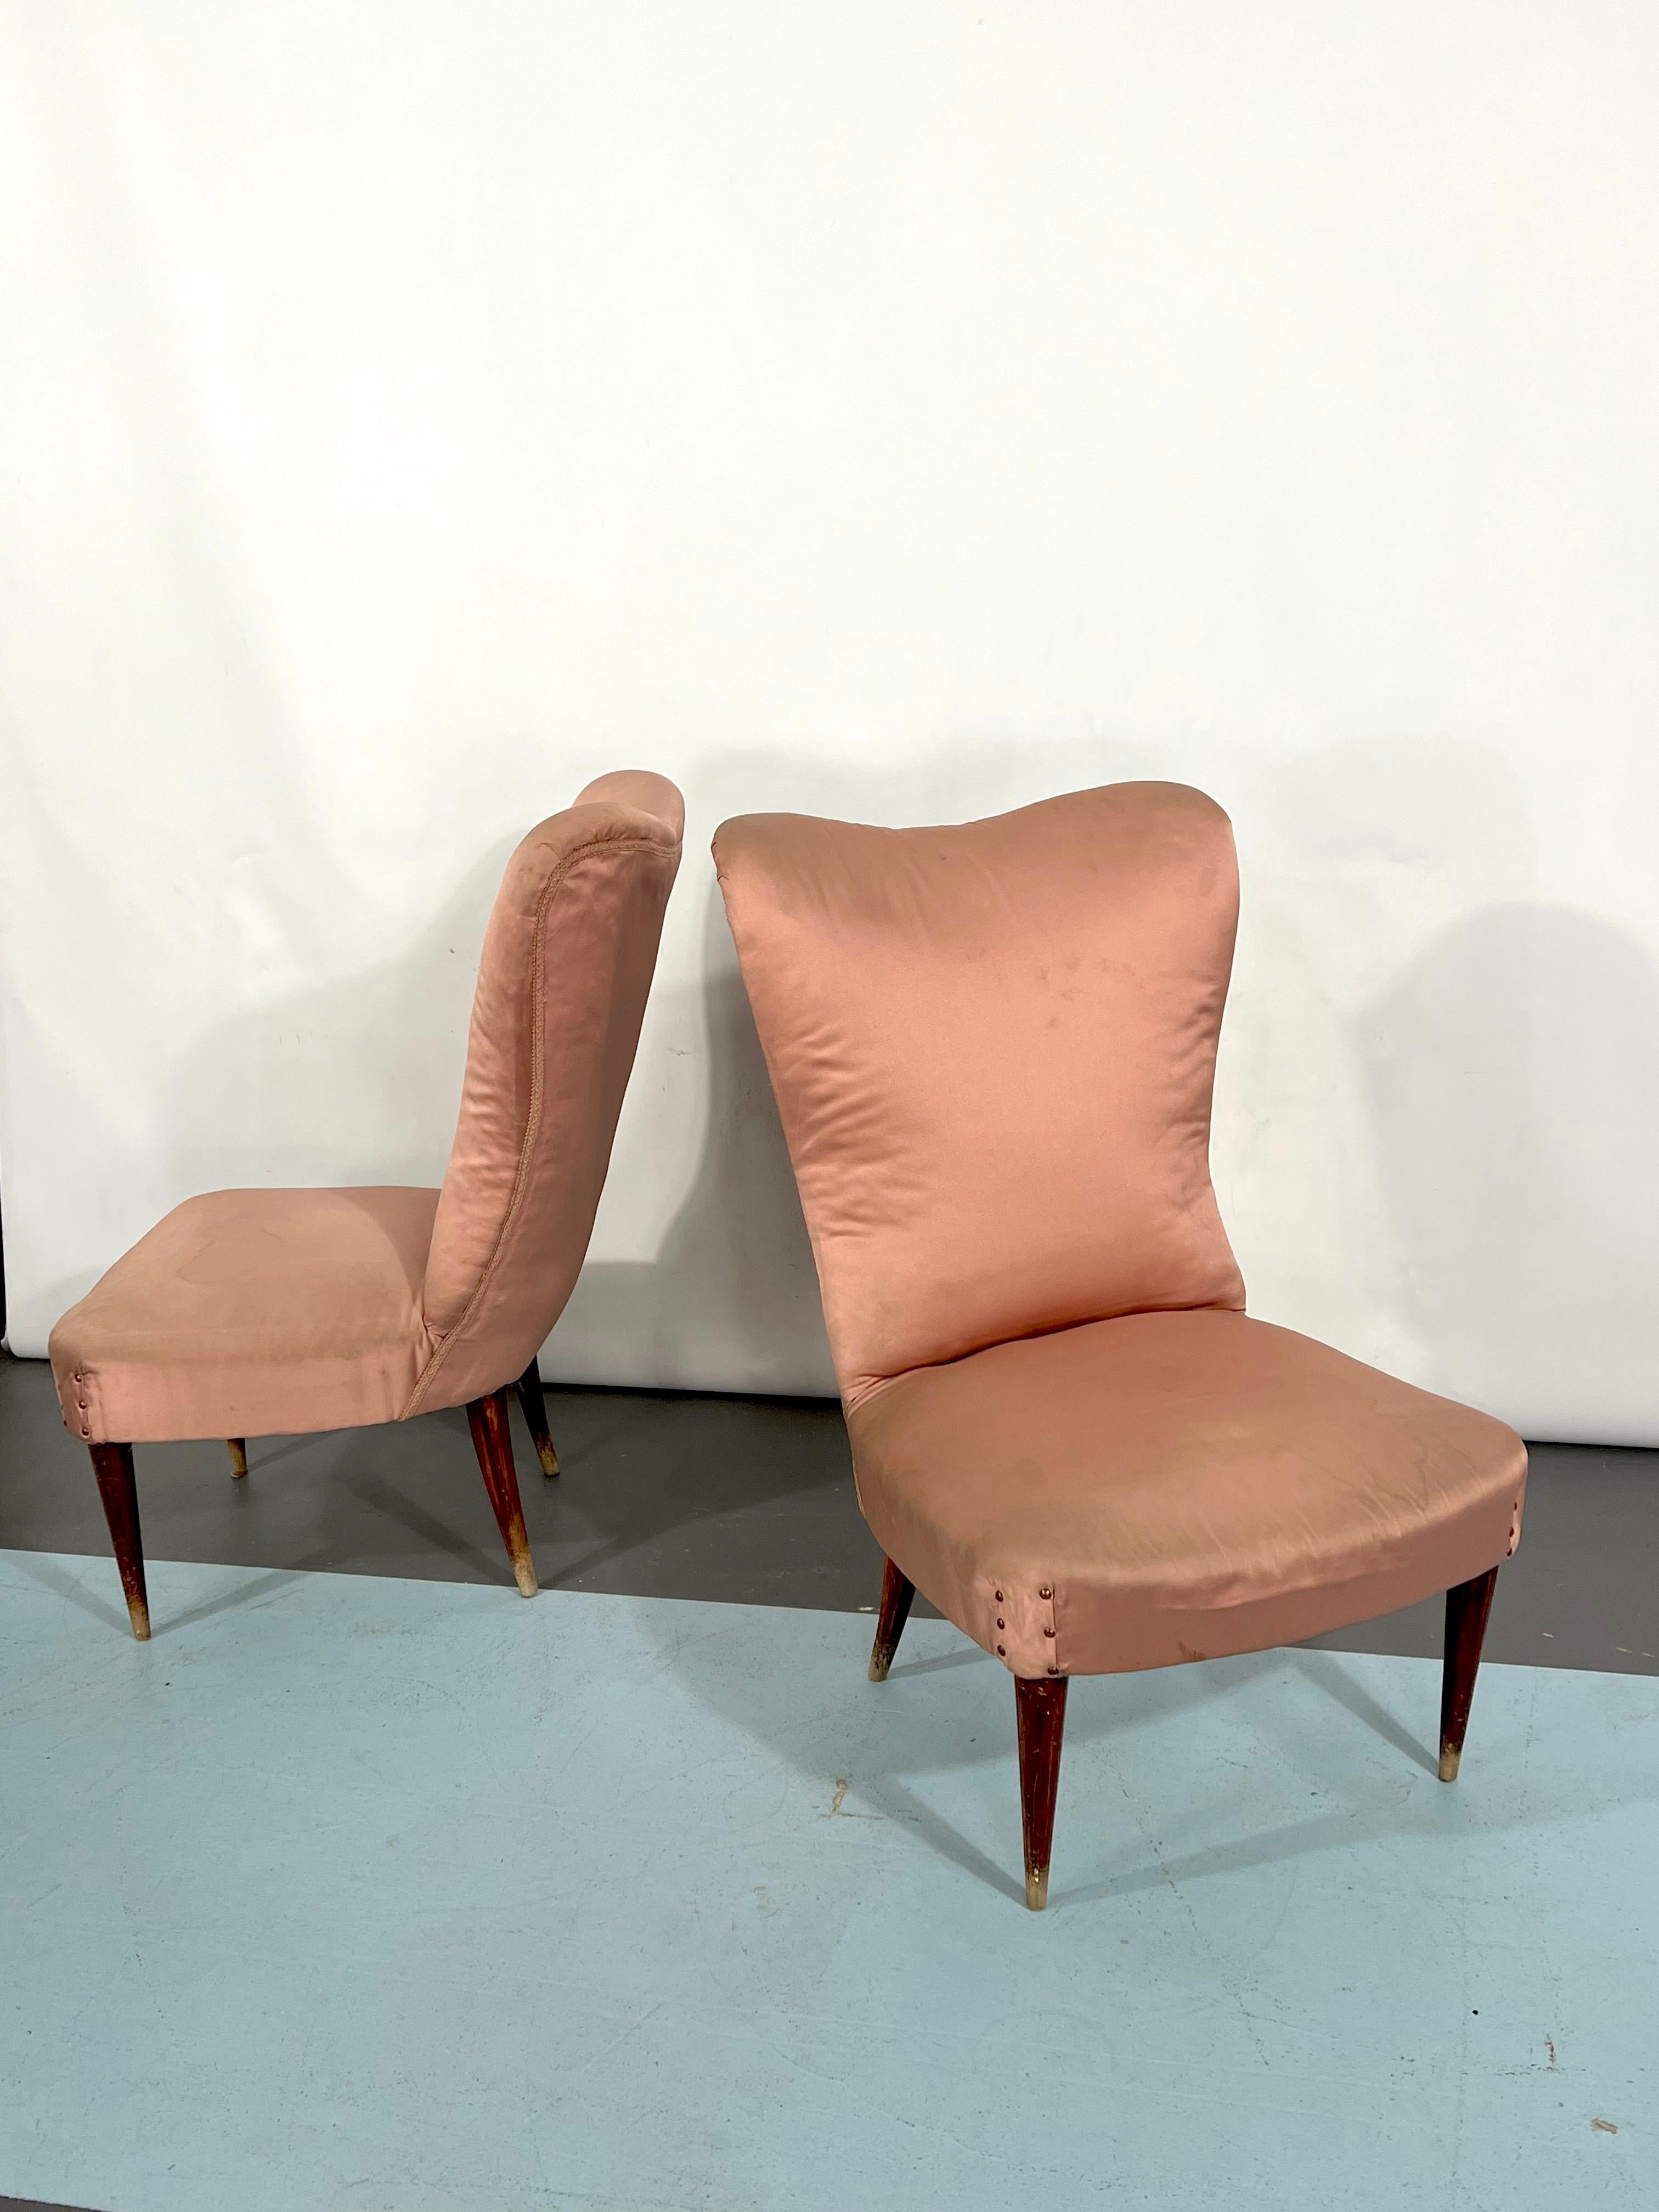 Satin Italian Vintage Pair of Club Armchairs in the Manner of Gio Ponti, 1950s For Sale